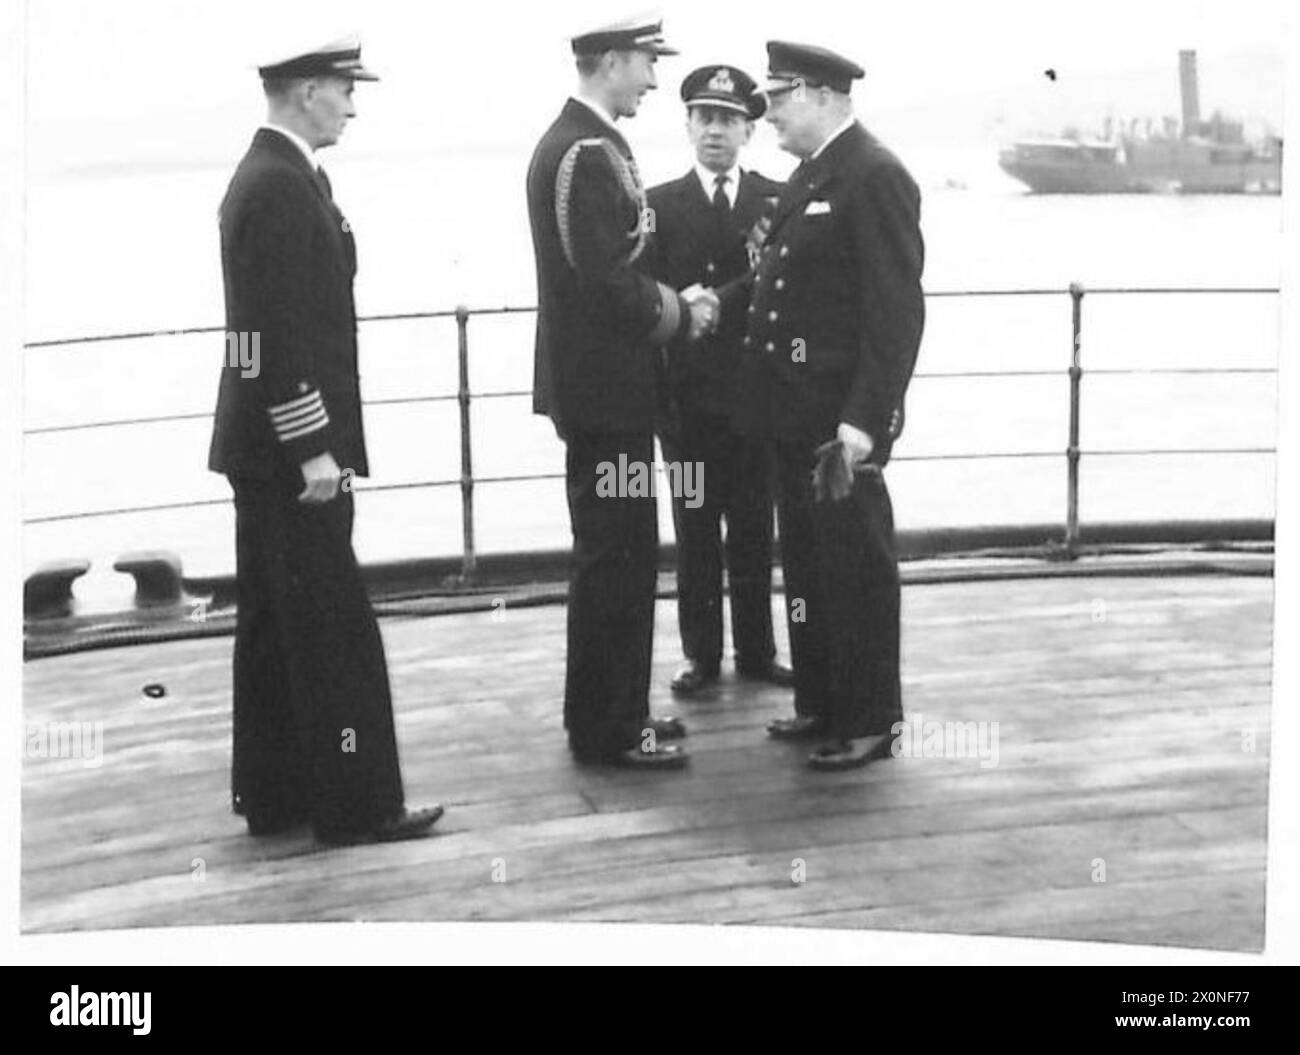 PRESIDENT MEETS PRIME MINISTER - Prime Minister greets President Roosevelt's Naval ADC., Captain Beardall, and the Commander-in-Chief, US Atlantic Fleets Chief of Staff, Captain Badger, who were the first to come aboard H.S.M. Prince of Wales. Photographic negative , British Army Stock Photo